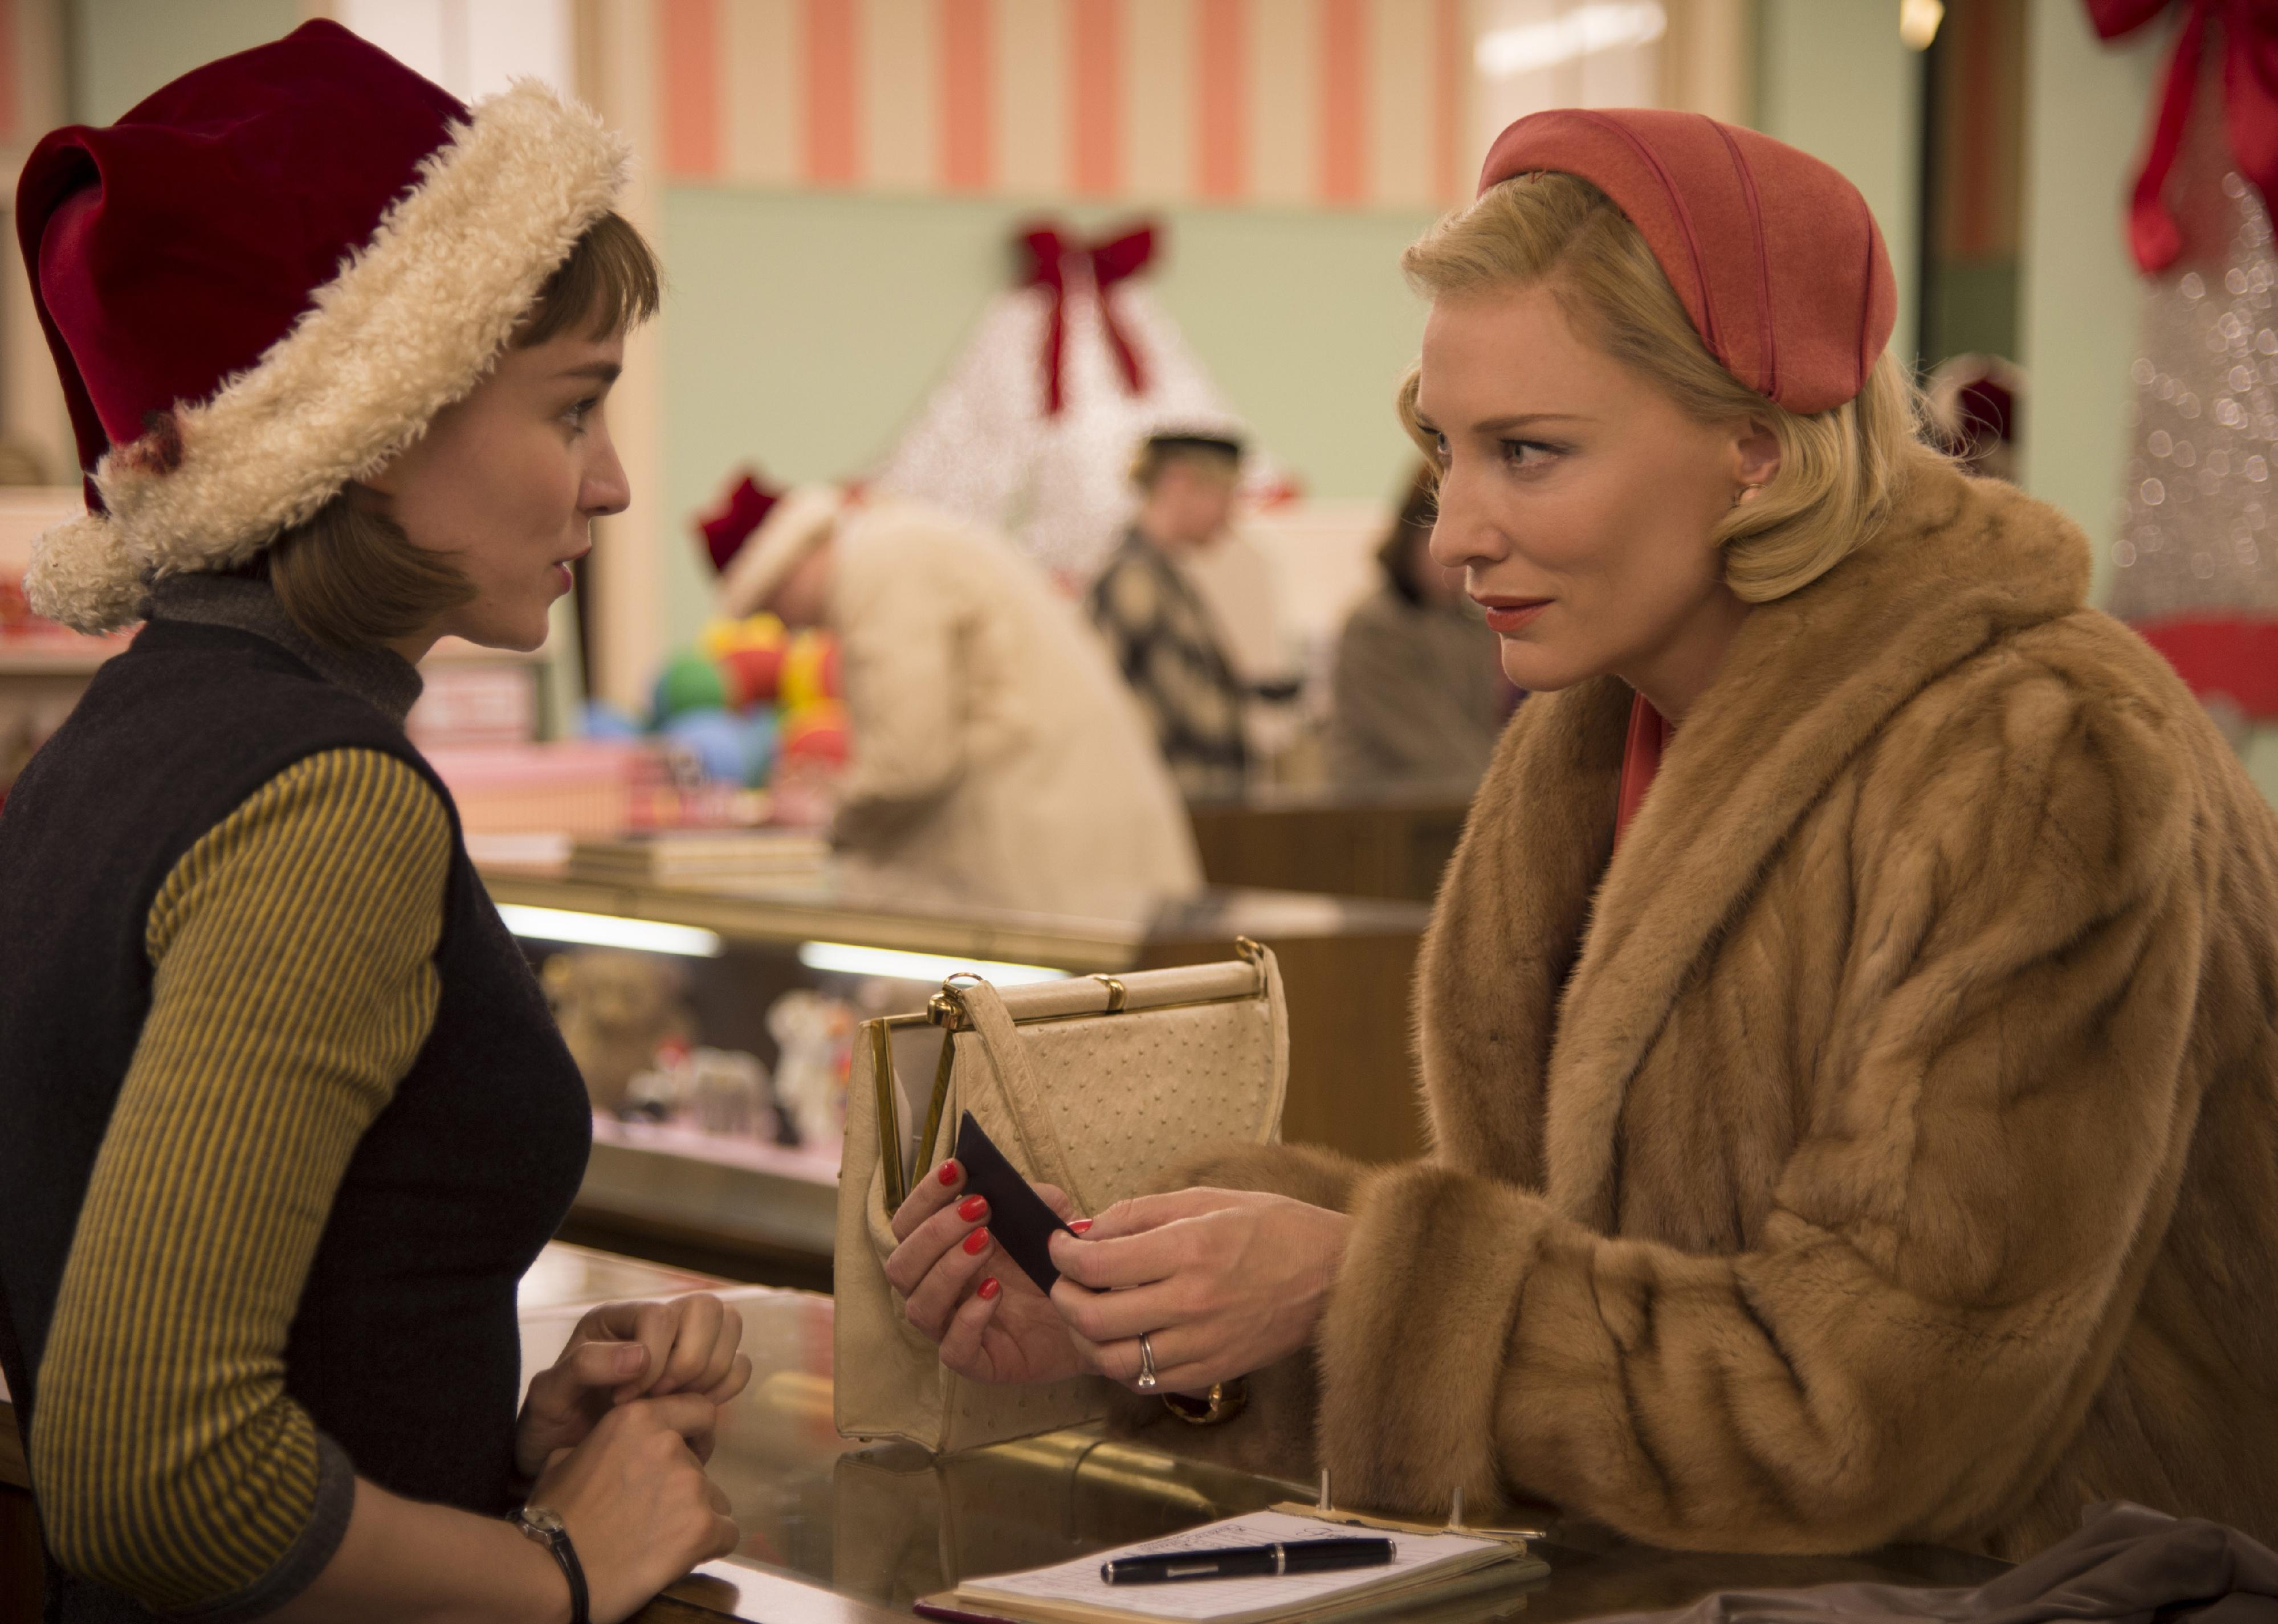 Rooney Mara in a Santa hat behind a counter talking to Cate Blanchett.